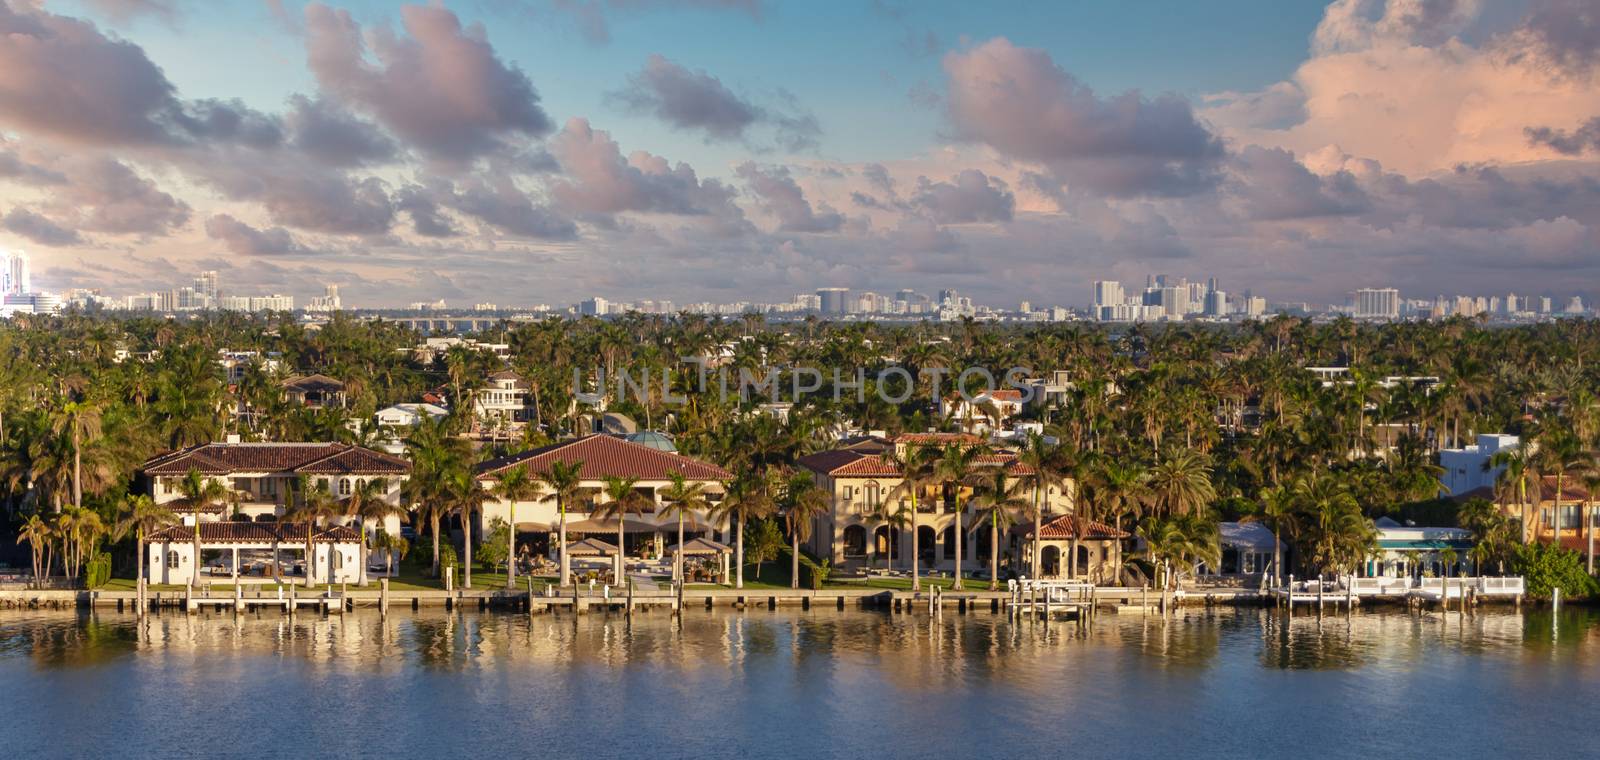 A Luxury Mansions on Miami Shipping Channel